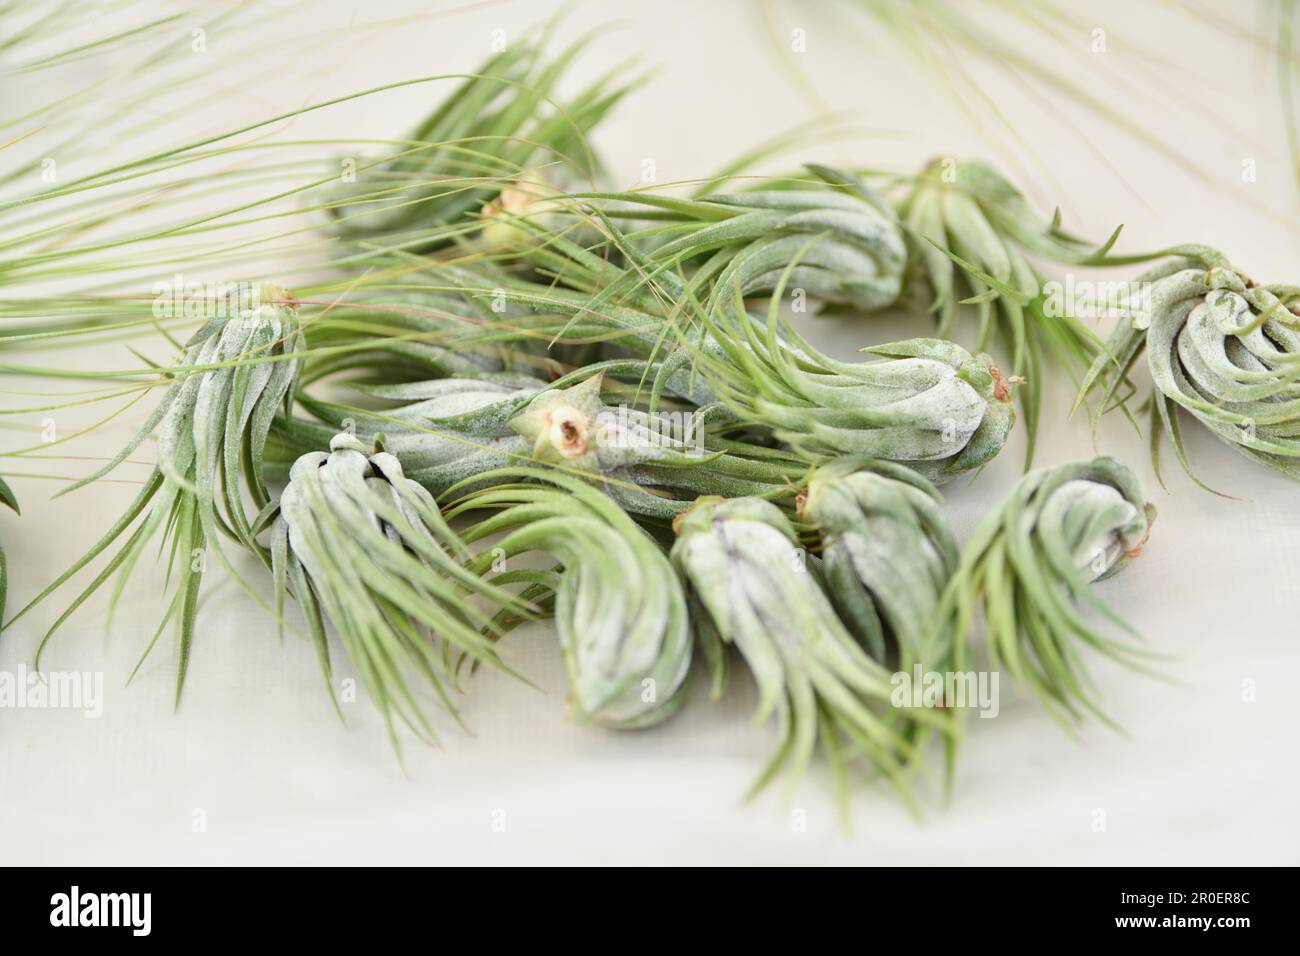 Green tillandsia air plants on a white background Stock Photo